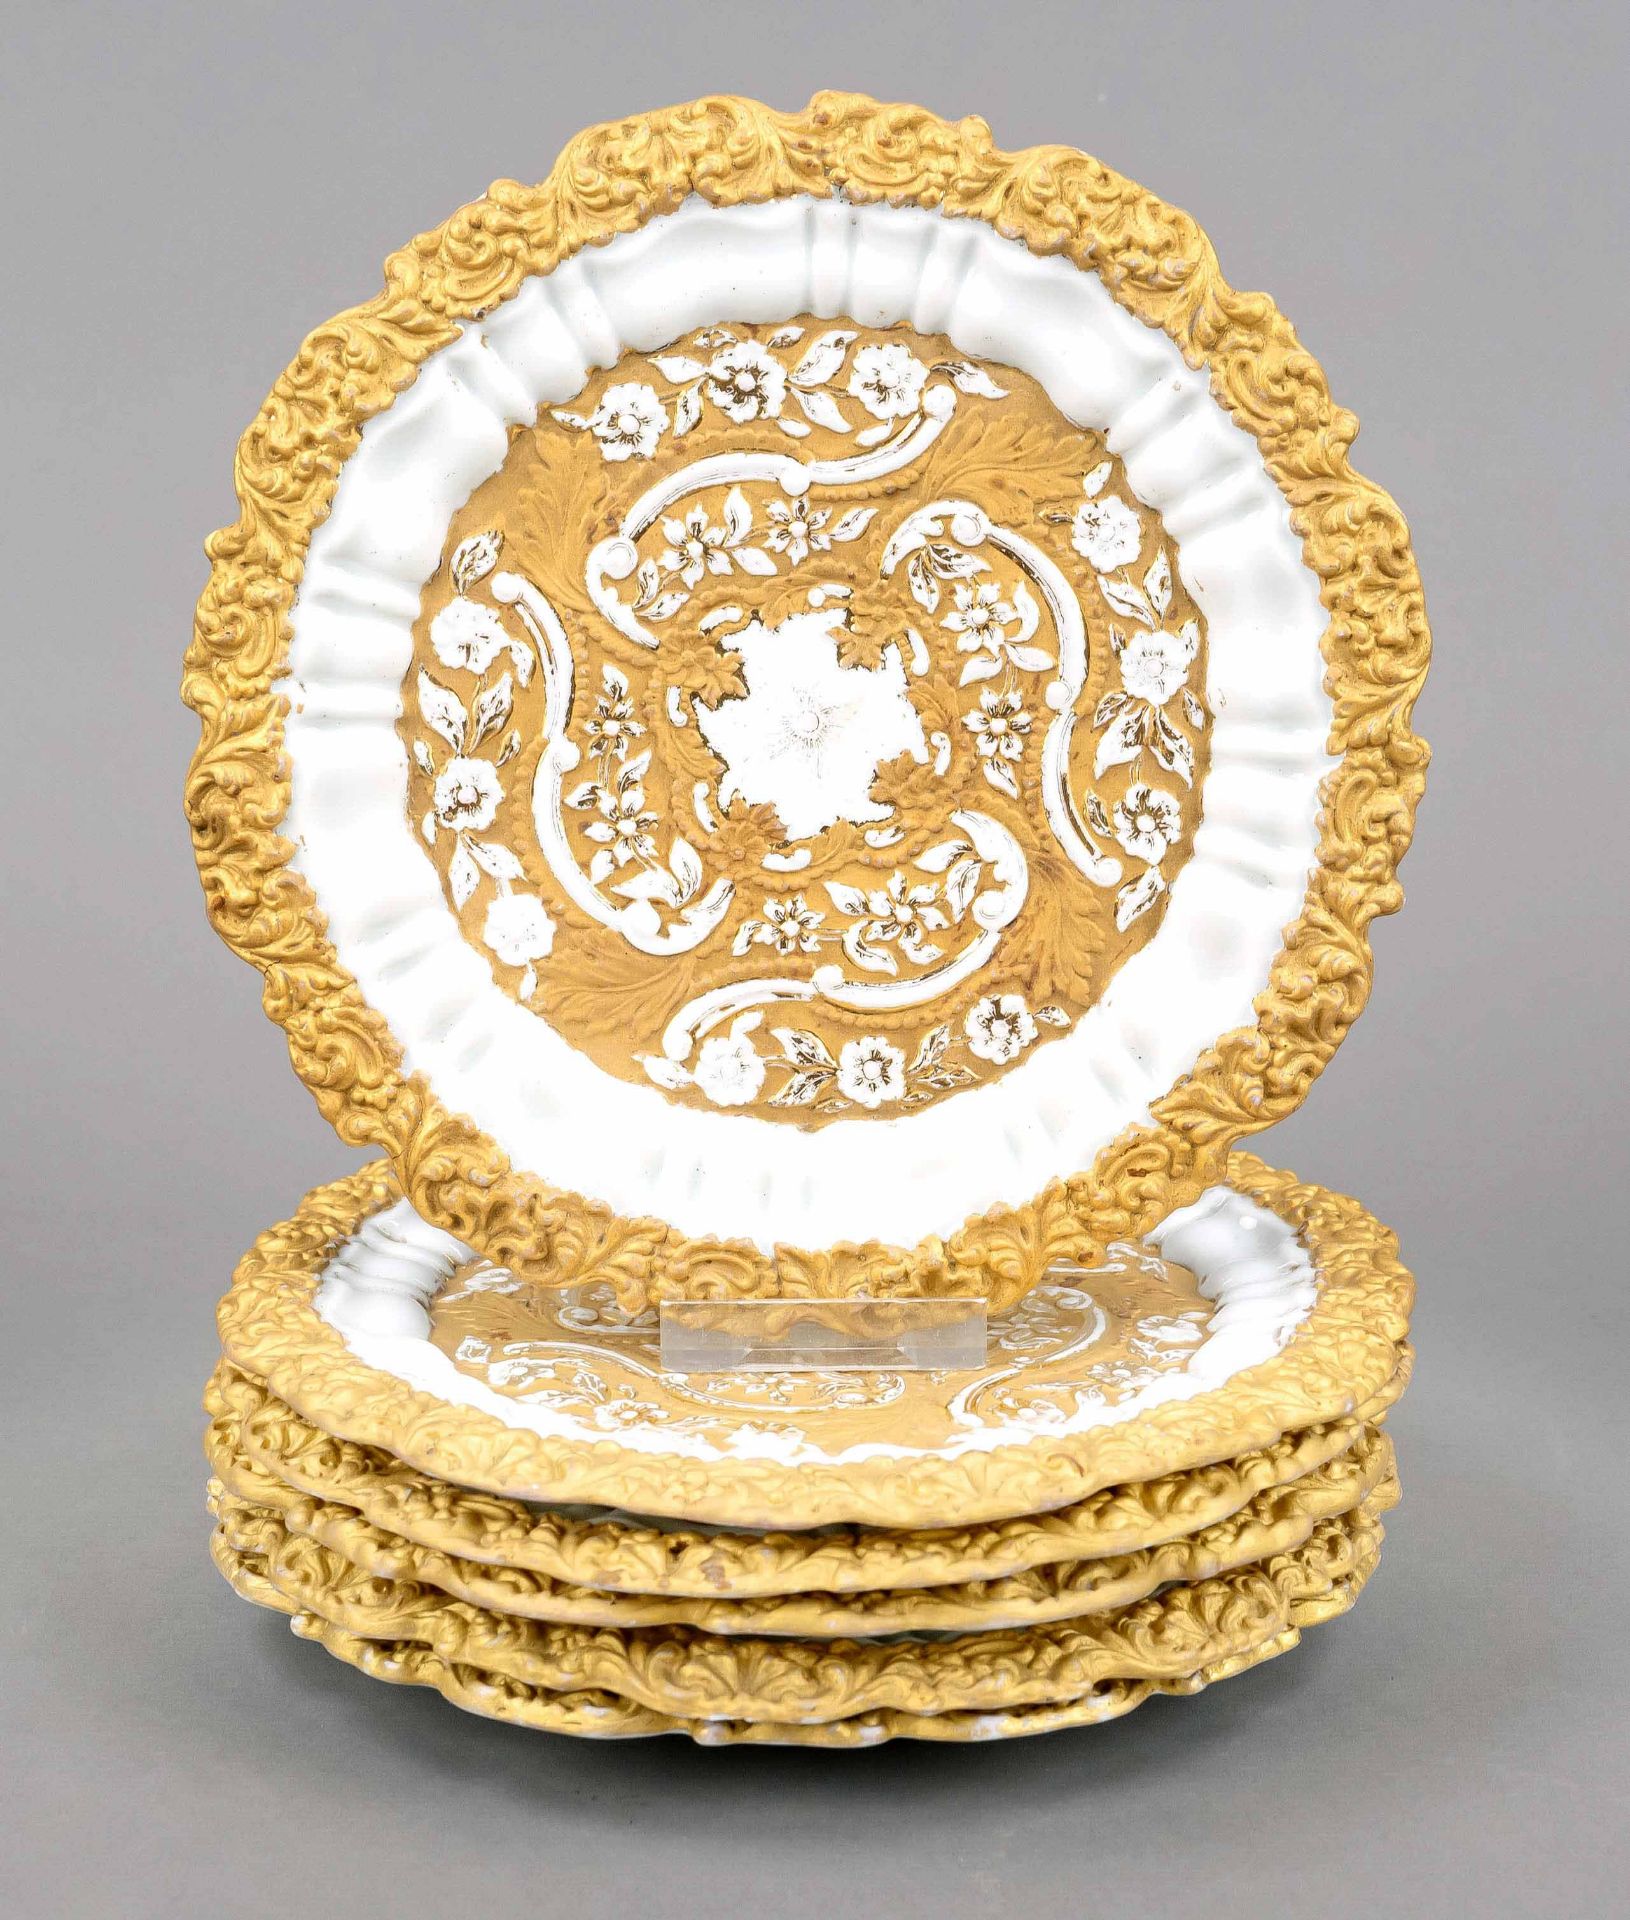 Six small ceremonial plates, Meissen, end of 18th century, 1st choice, model no. U15 3, flat form